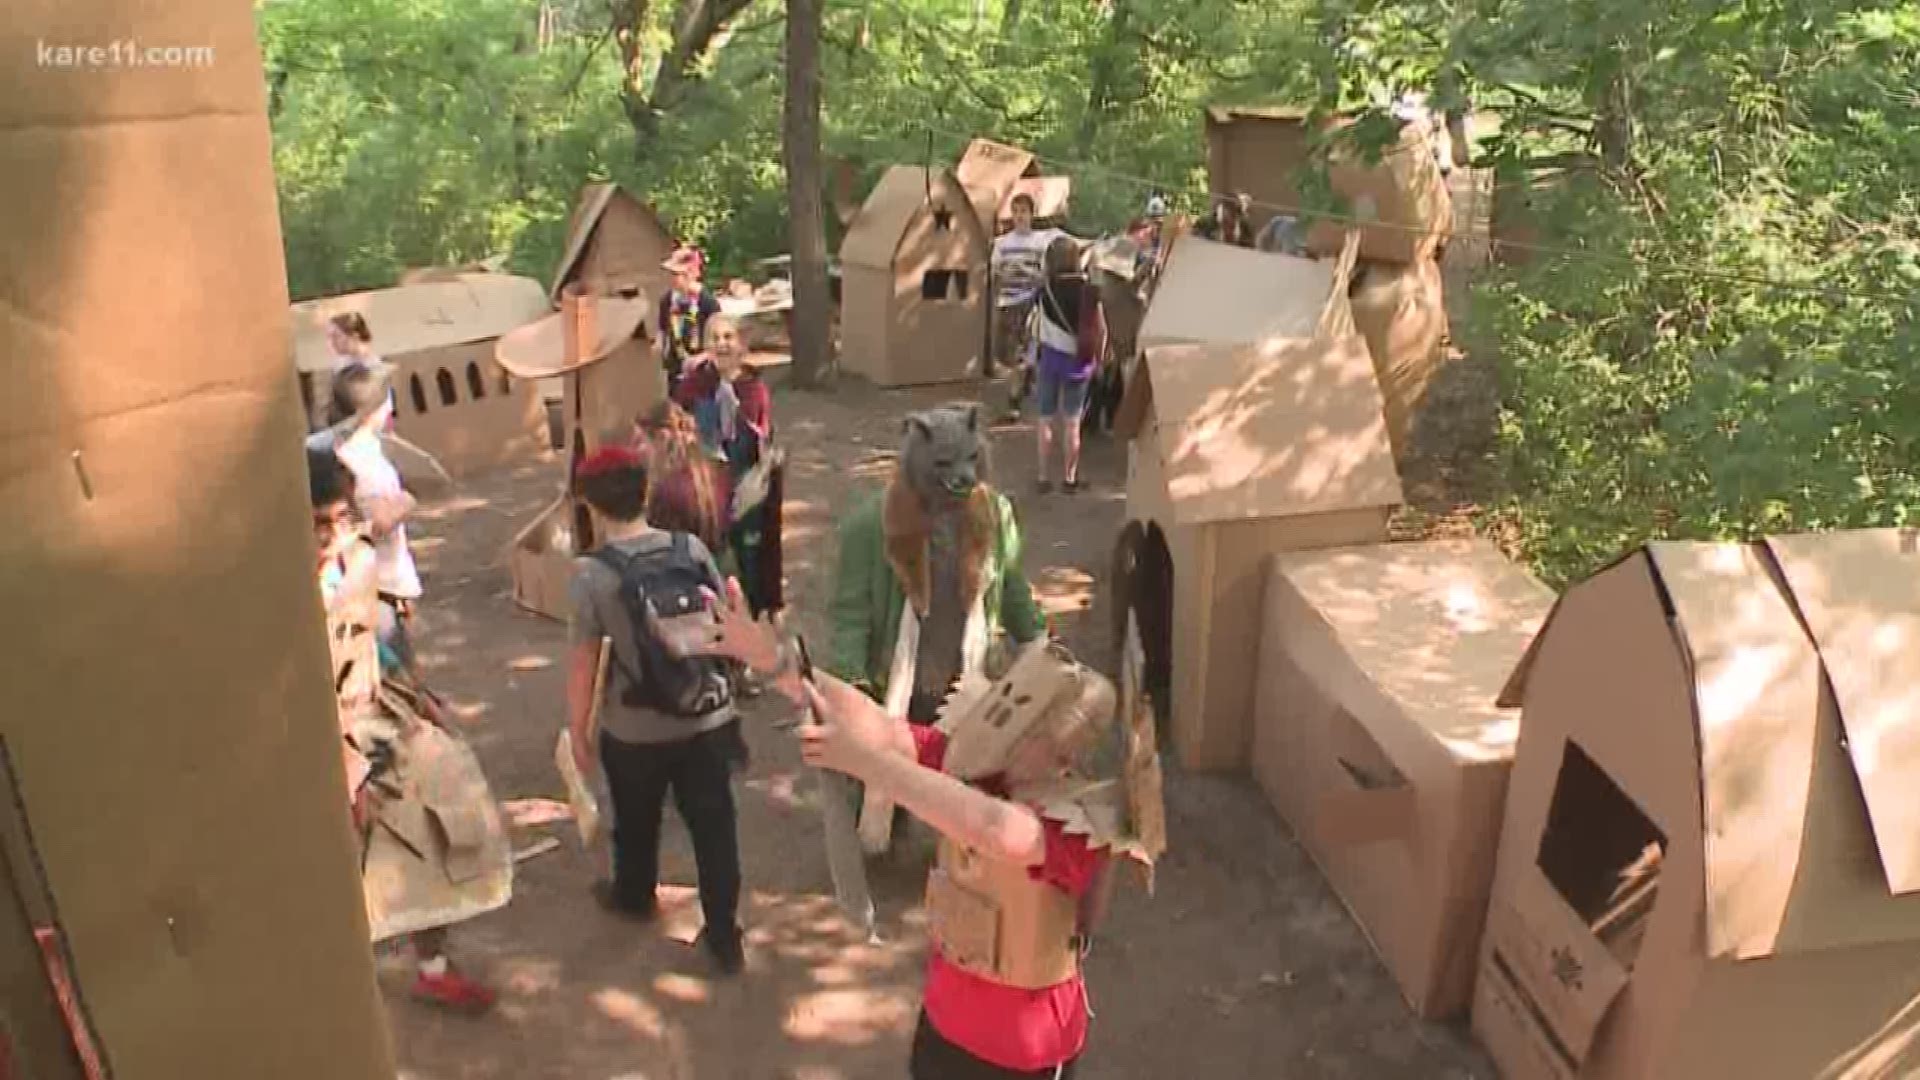 An unusual summer camp in Minnesota is exploding in popularity. https://kare11.tv/2MIQh1p